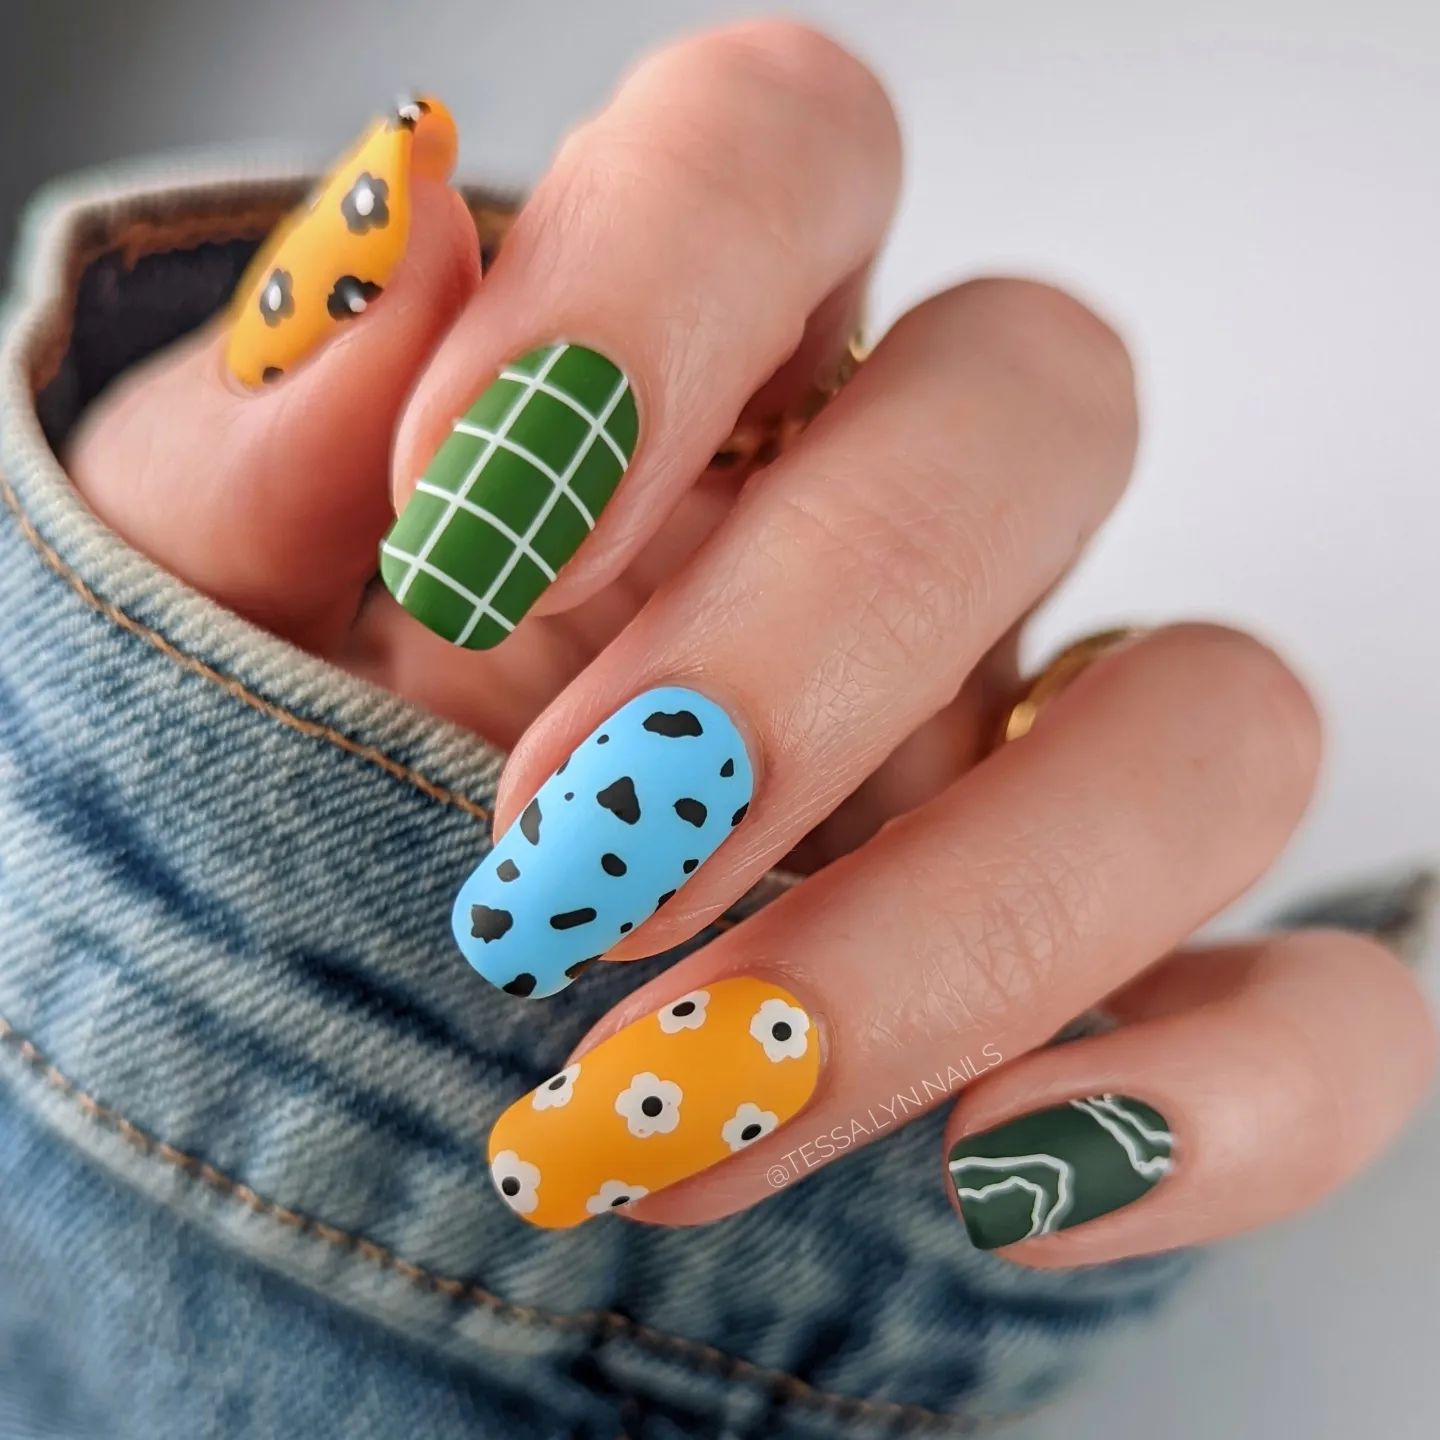 Among different and fabulous nail designs, it is so hard to choose one to apply on your nails. If you are one of these women, cover your colorful matte nails with lines, dots and daisies.